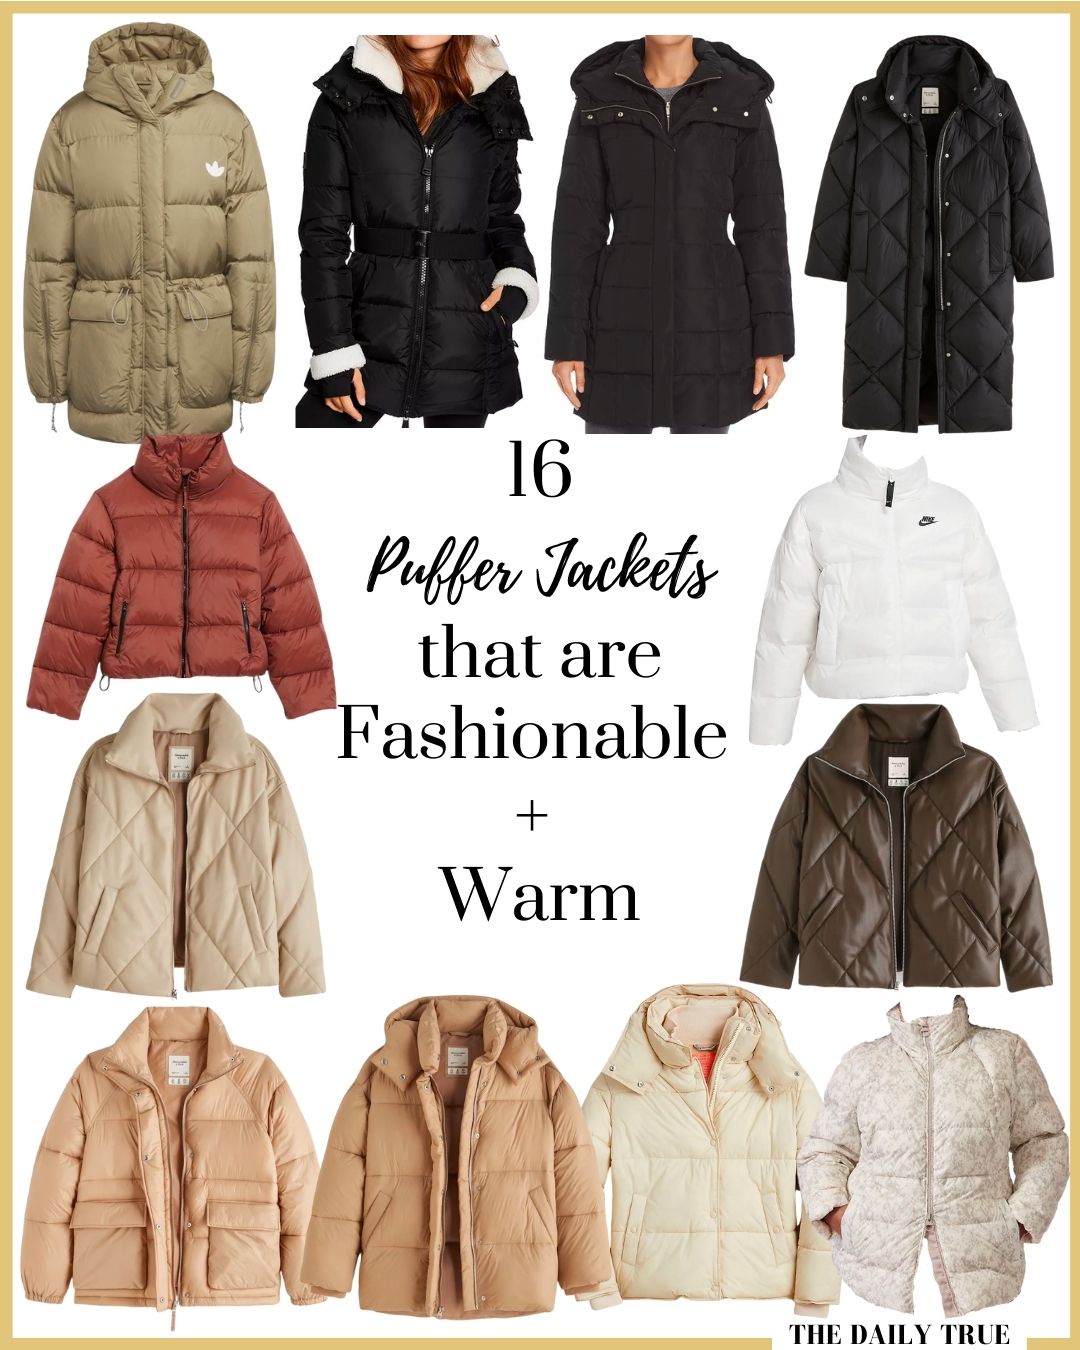 Puffer Jackets Approved: 16 Fashionable Options to Keep You Warm